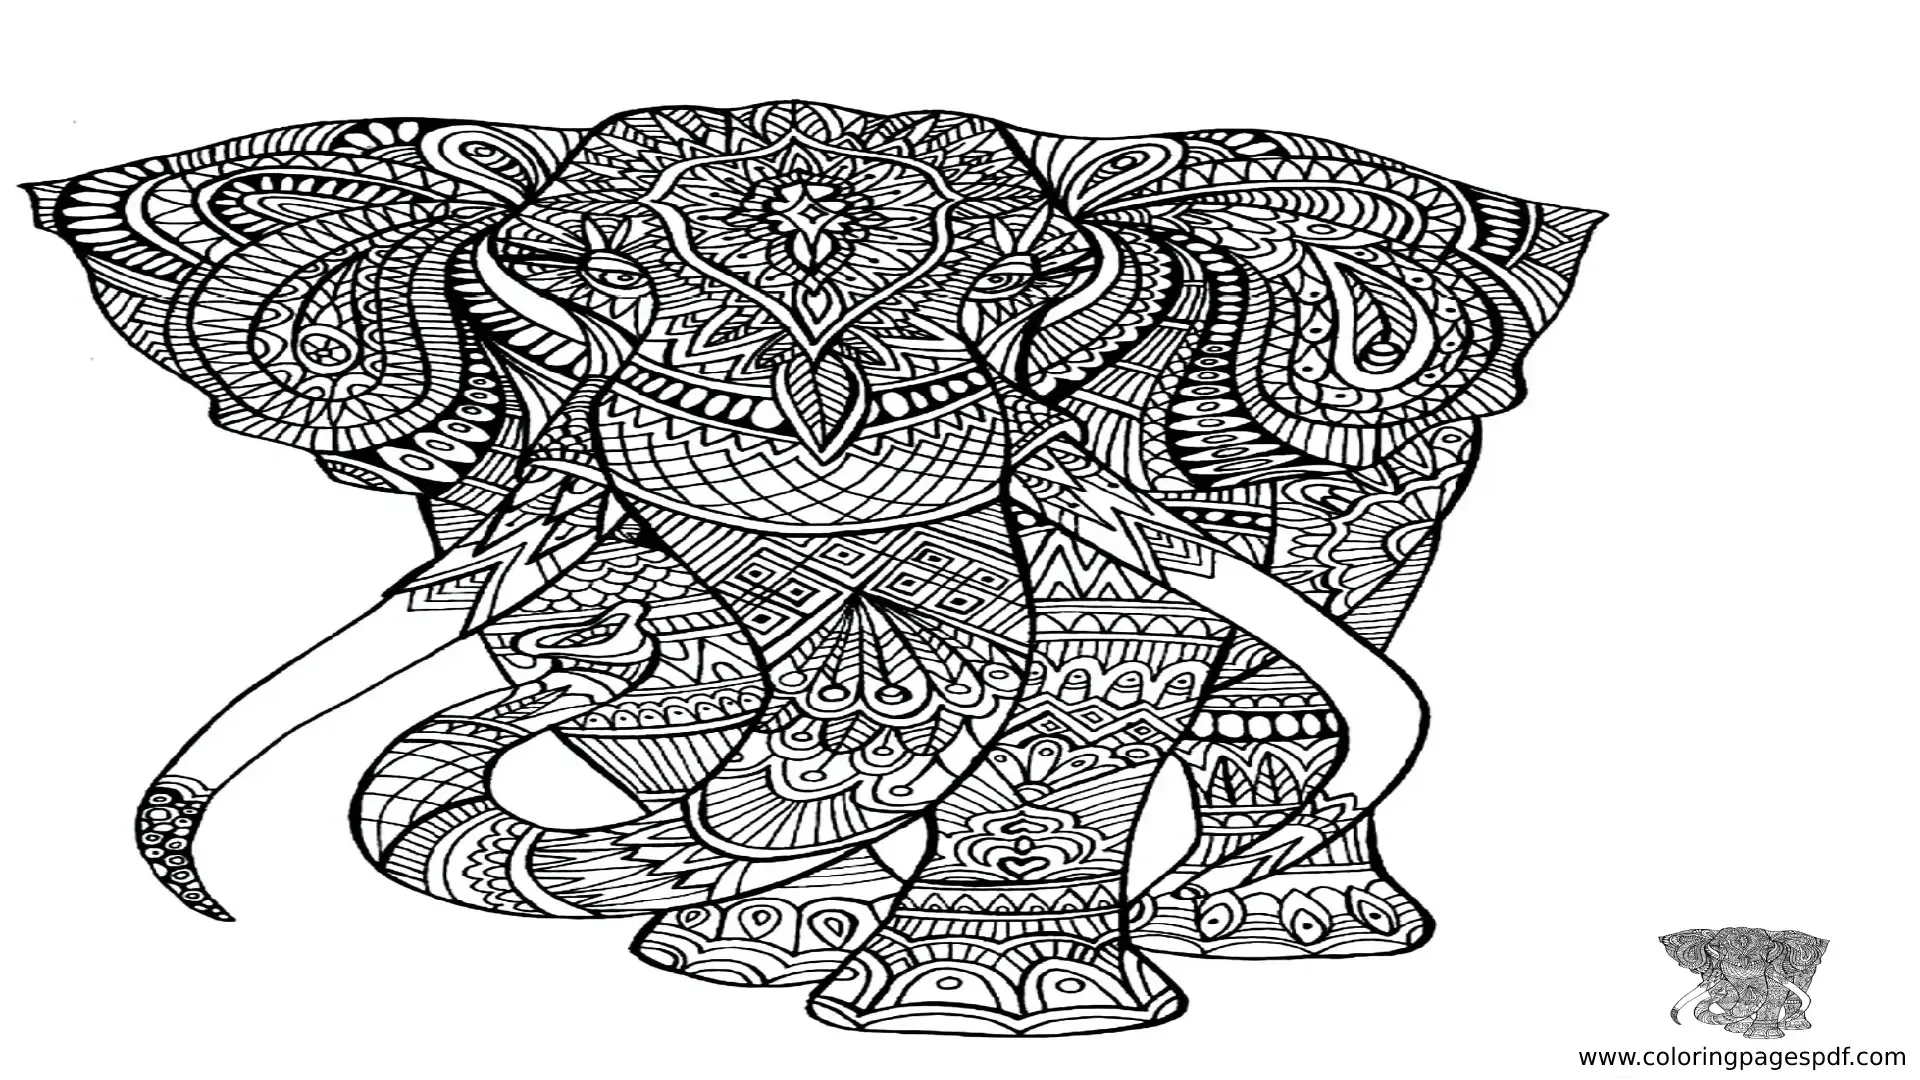 Coloring Pages Of An Elephant With Horns Mandala